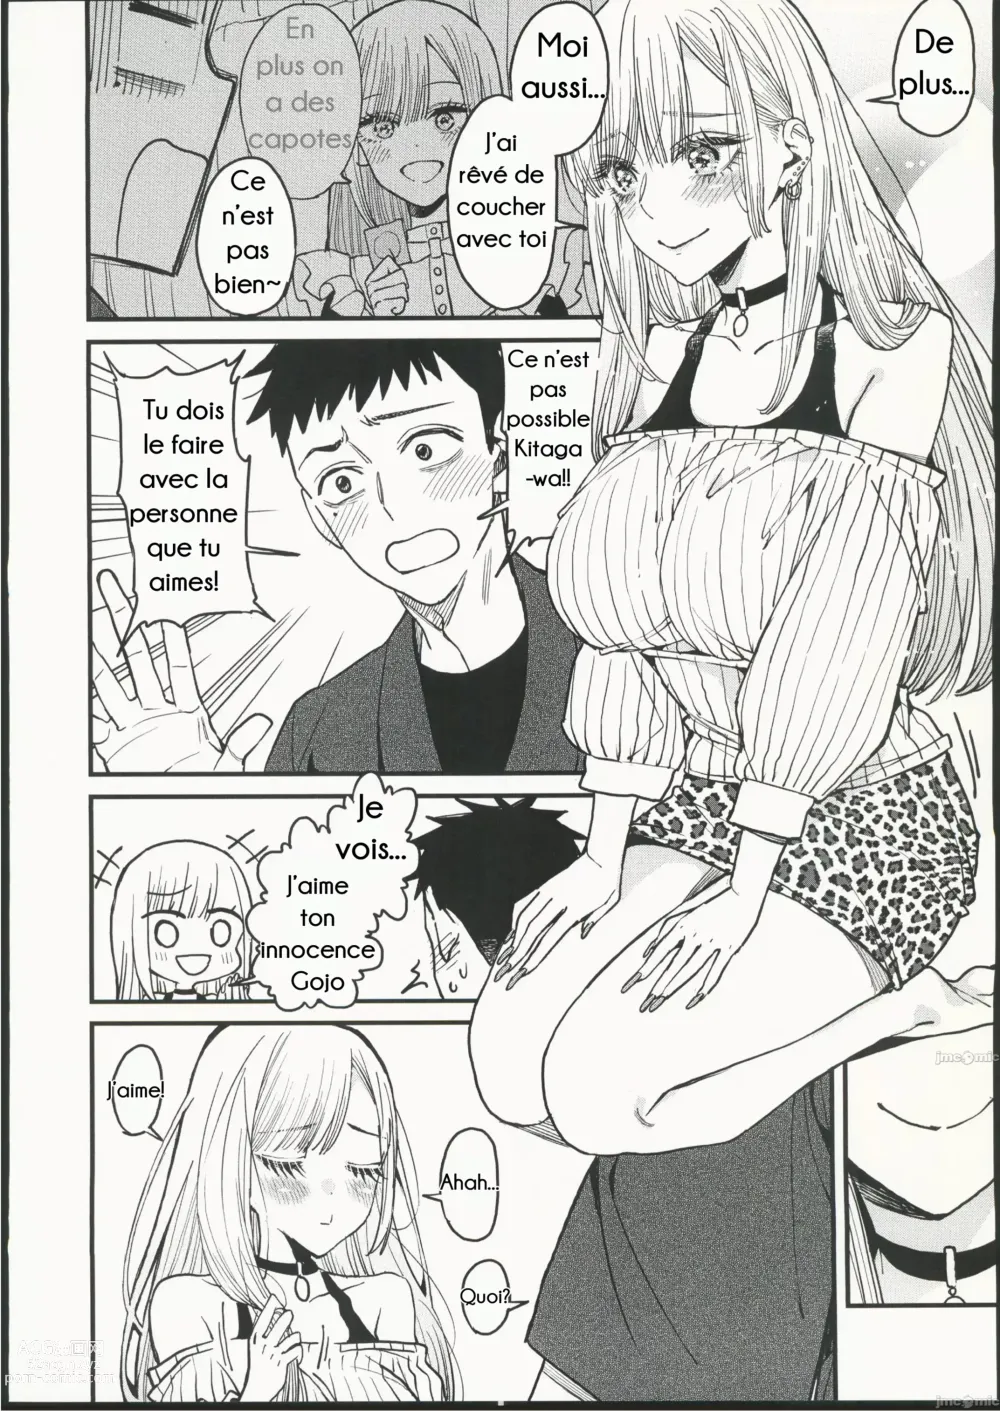 Page 11 of doujinshi Amour